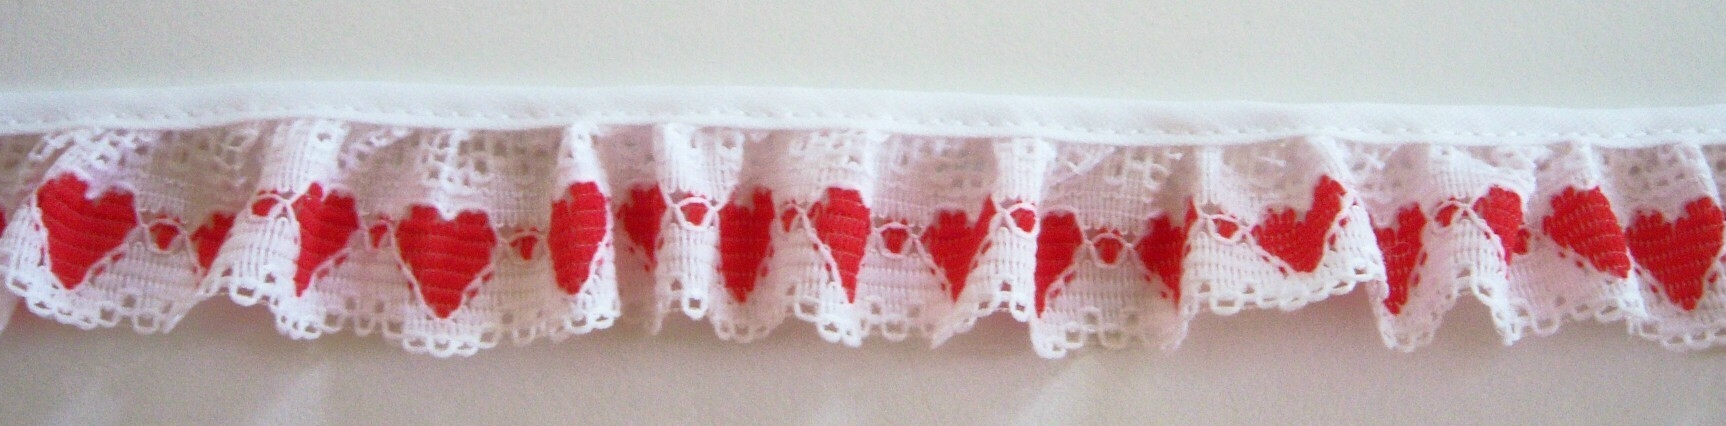 White/Red Hearts 1" Ruffled Lace